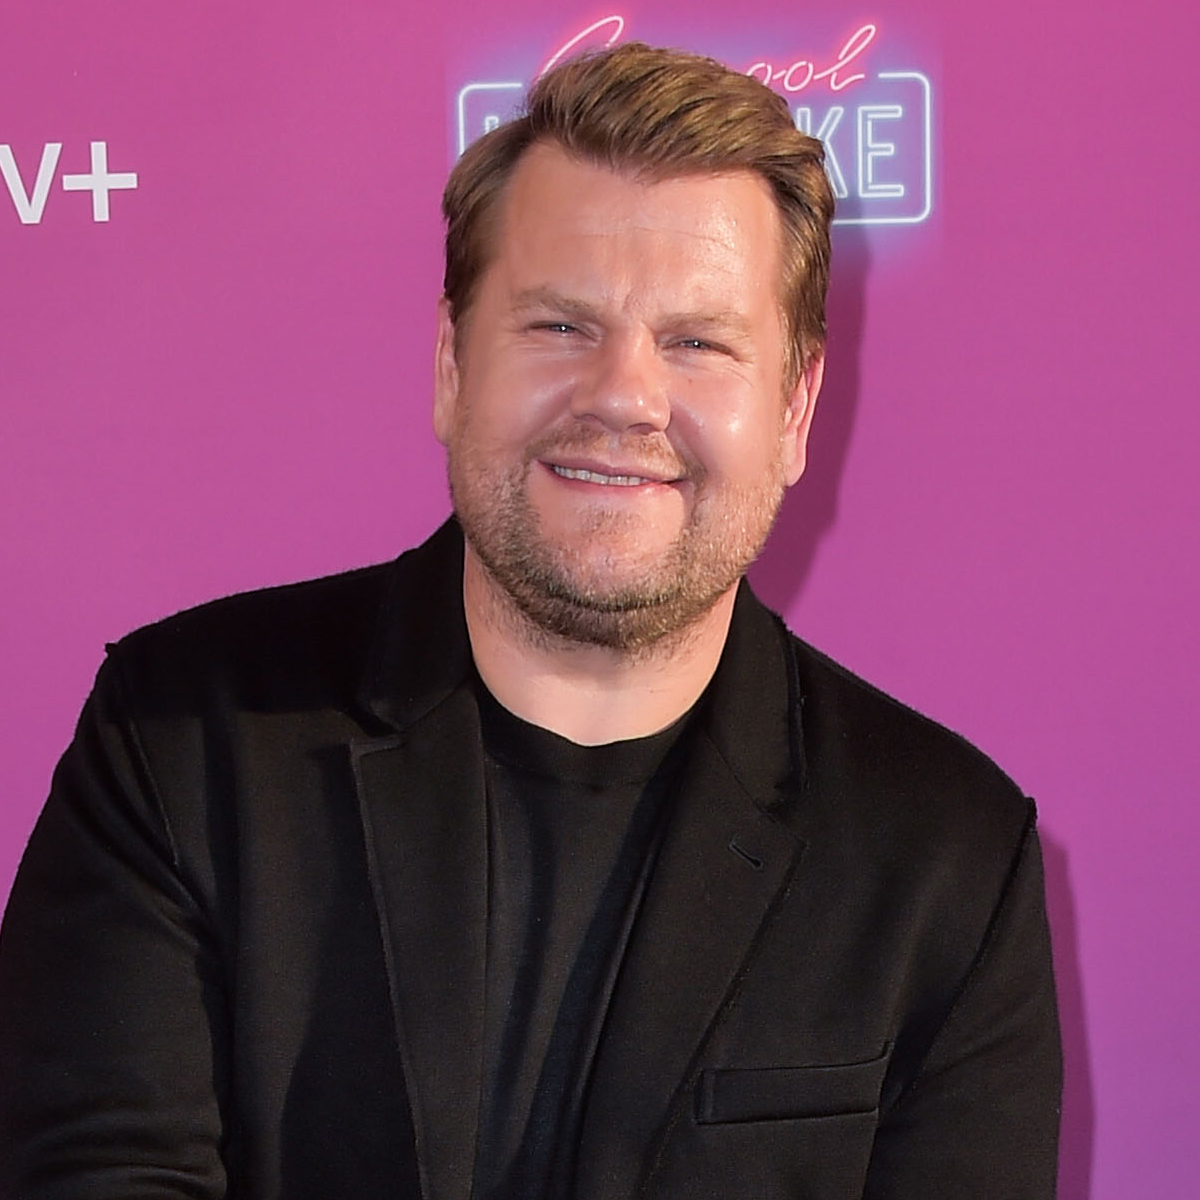 “Nasty” or Not? James Corden’s Hygiene Habits May Surprise You